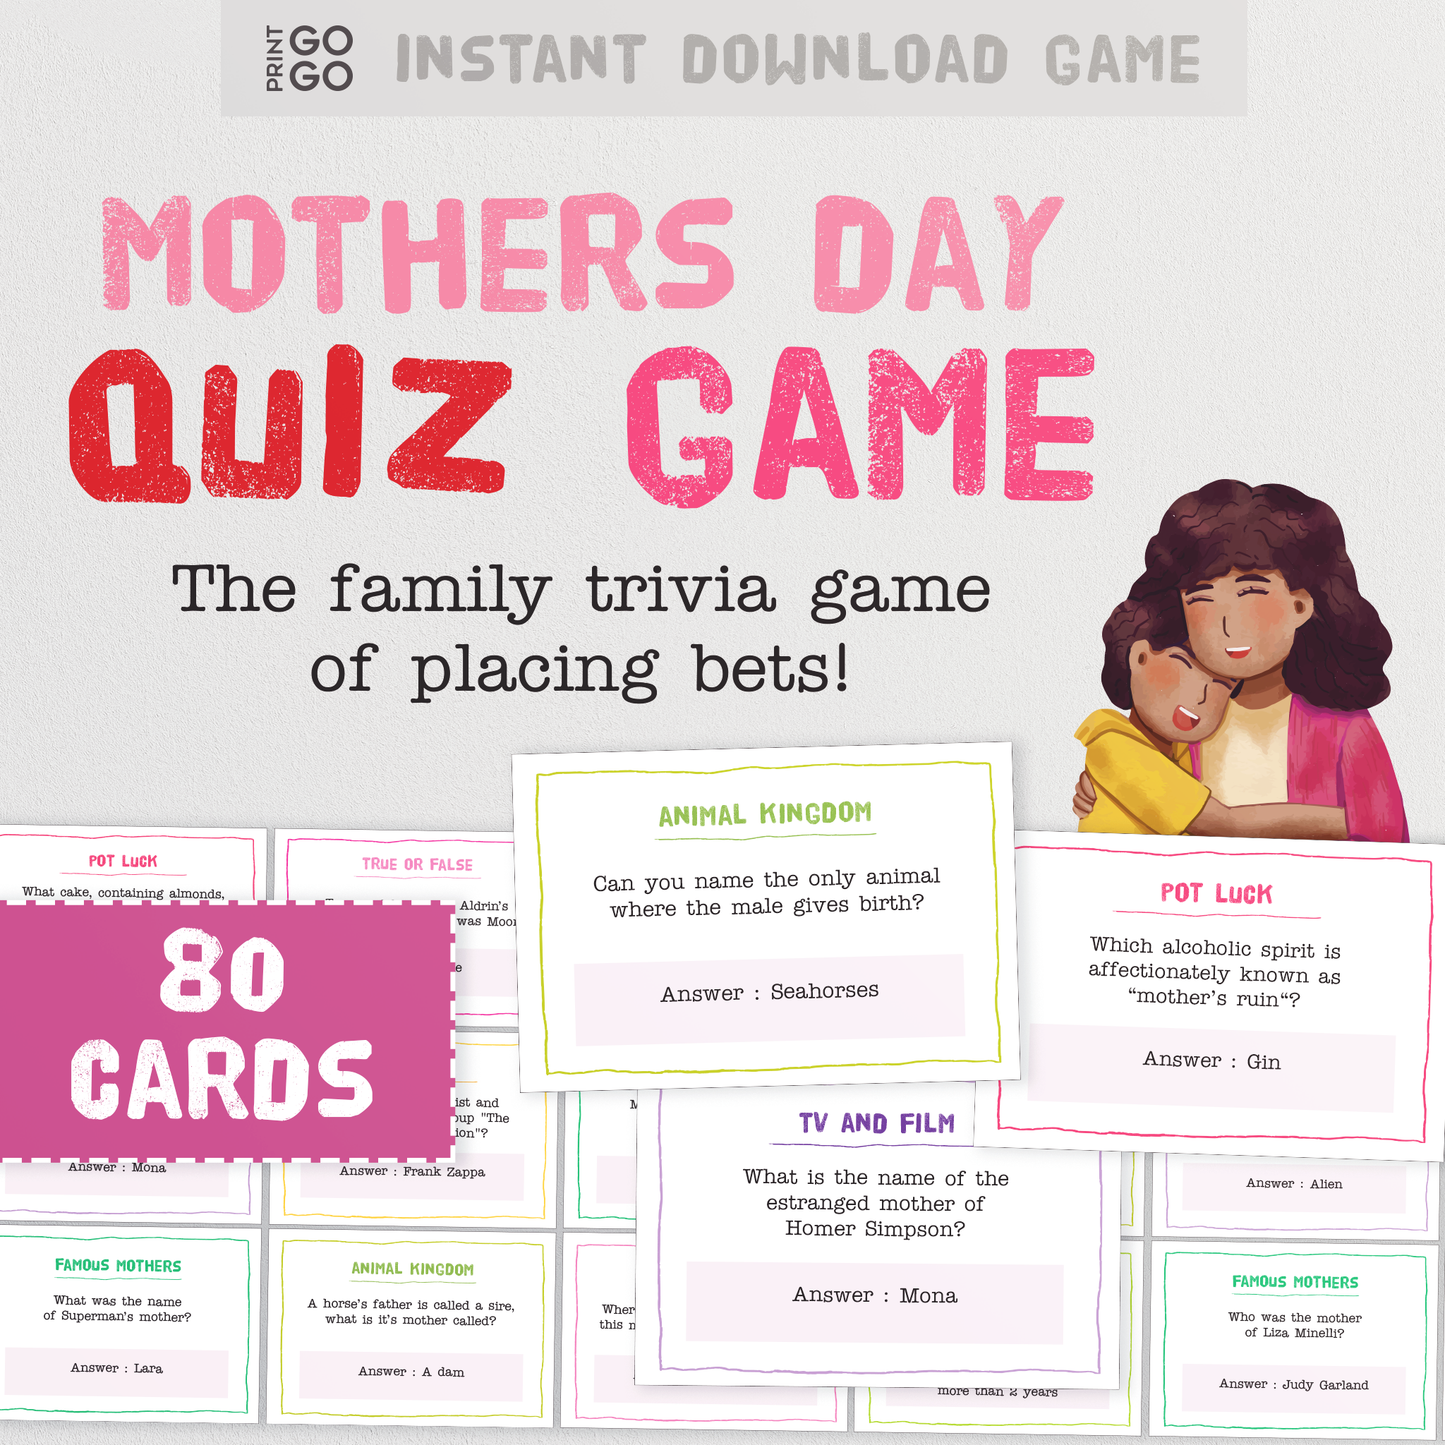 Mother's Day Four Game Bundle - Family Party Games for Everyone!